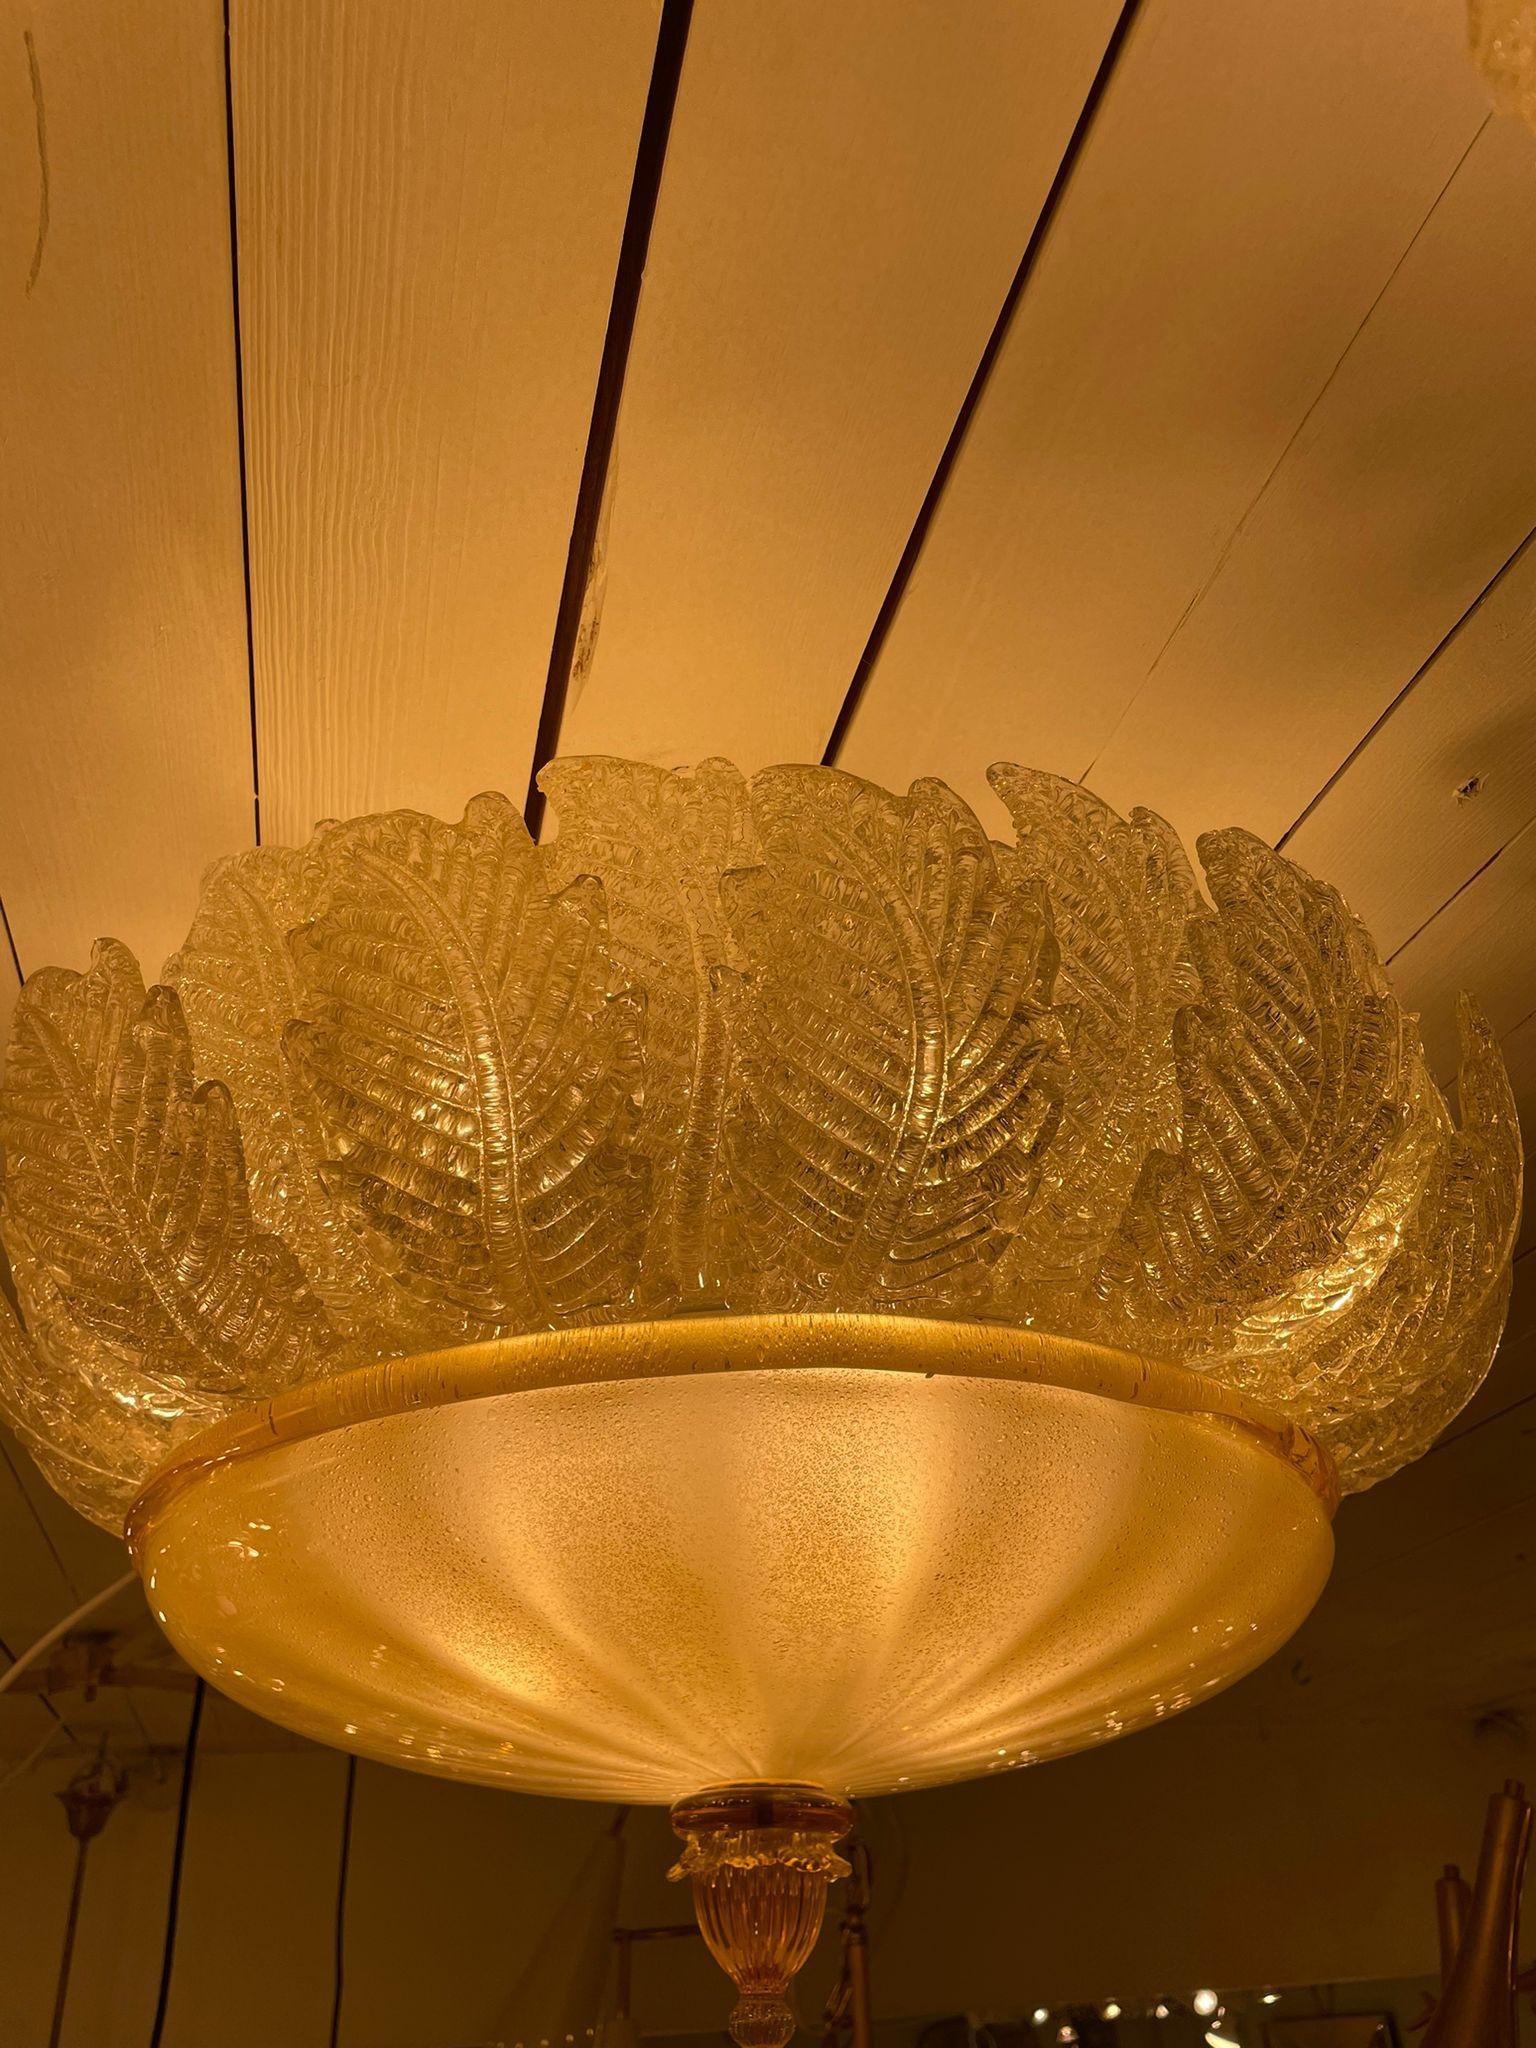 Murano Glass Barovier Ceiling Lamp with Gold Inclusion, Italy 1930s For Sale